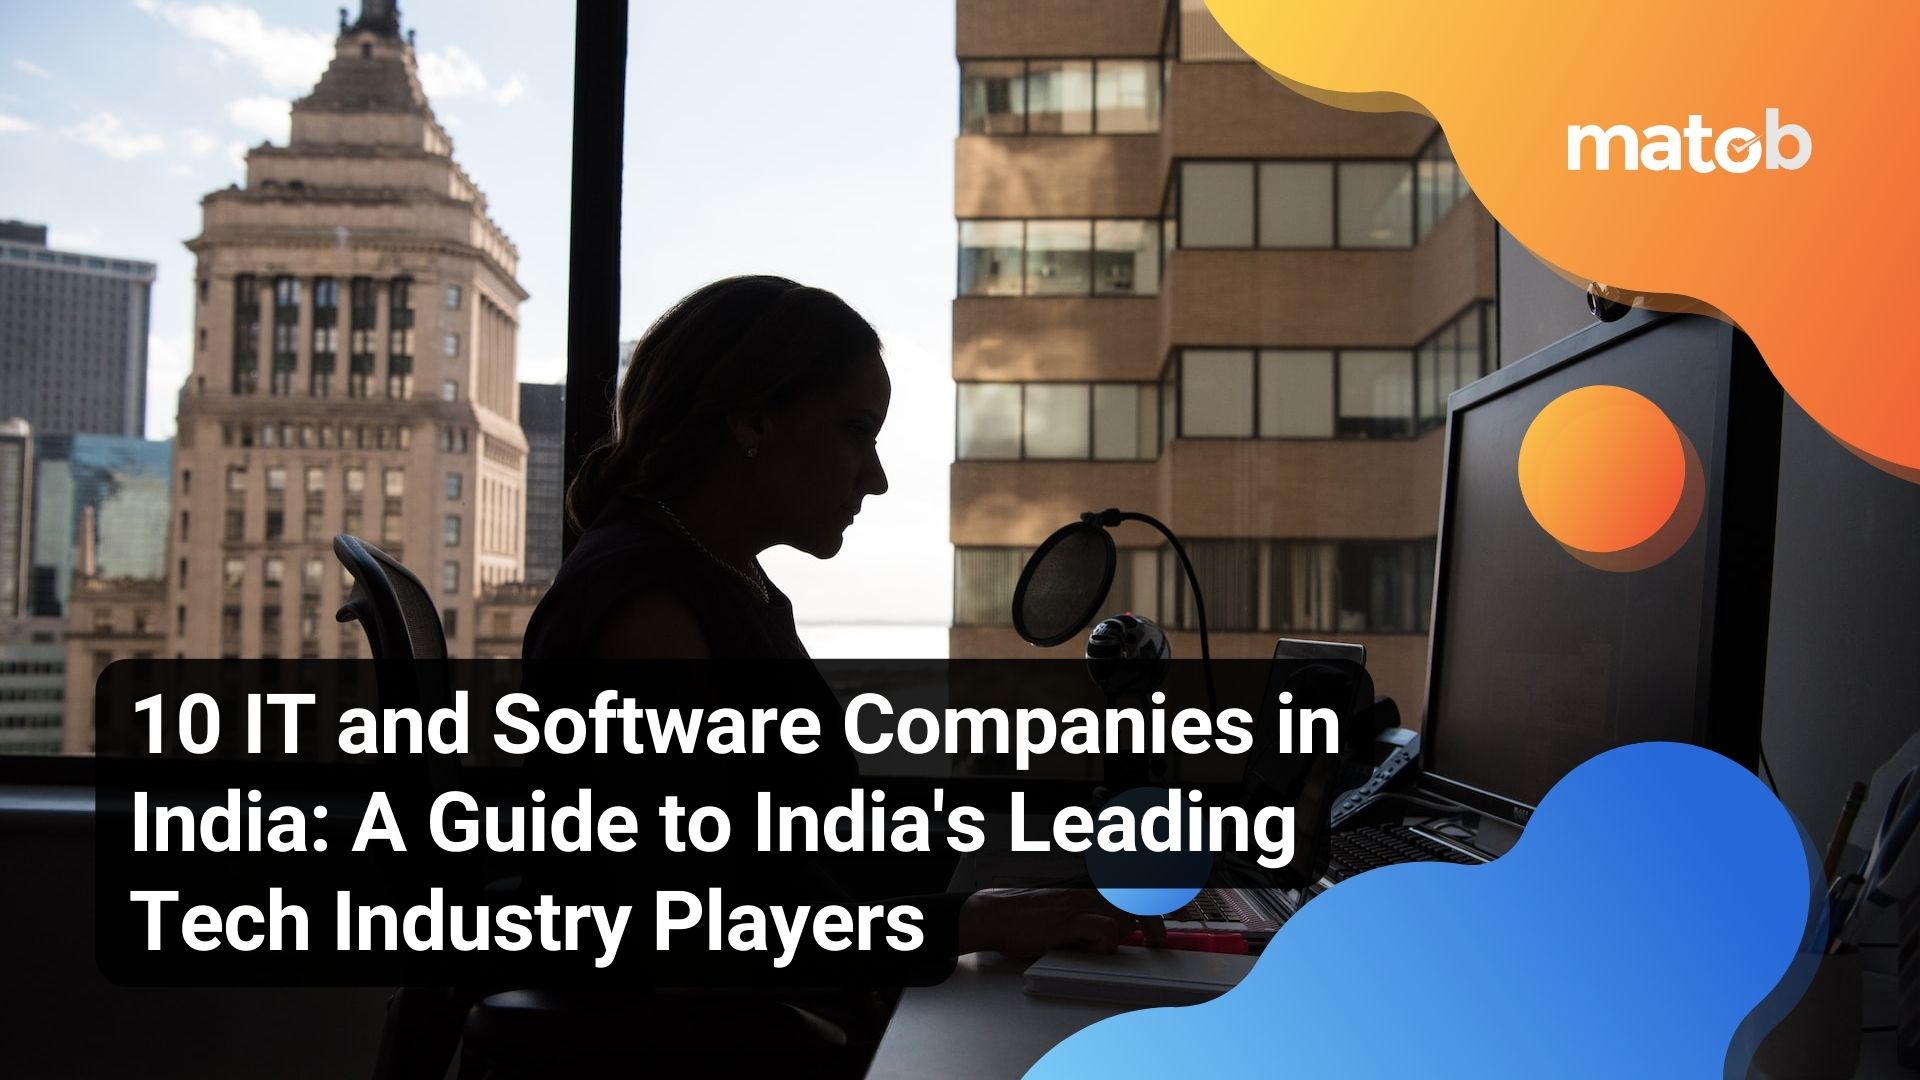 10 IT and Software Companies in India: A Guide to India's Leading Tech Industry Players